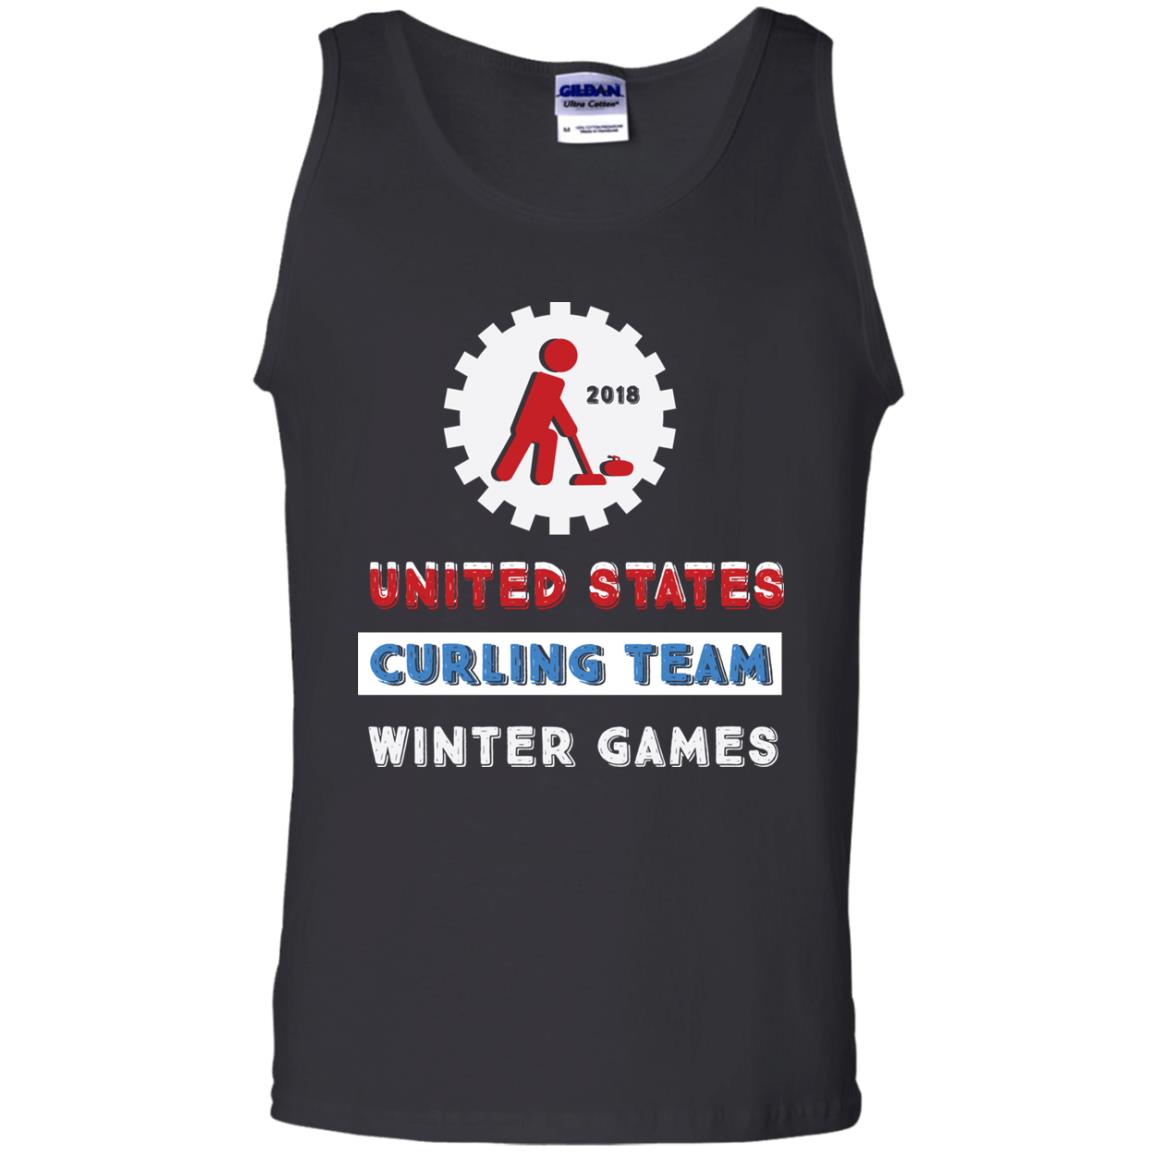 United States Curling Team Winter Games Curling Lover T-shirt